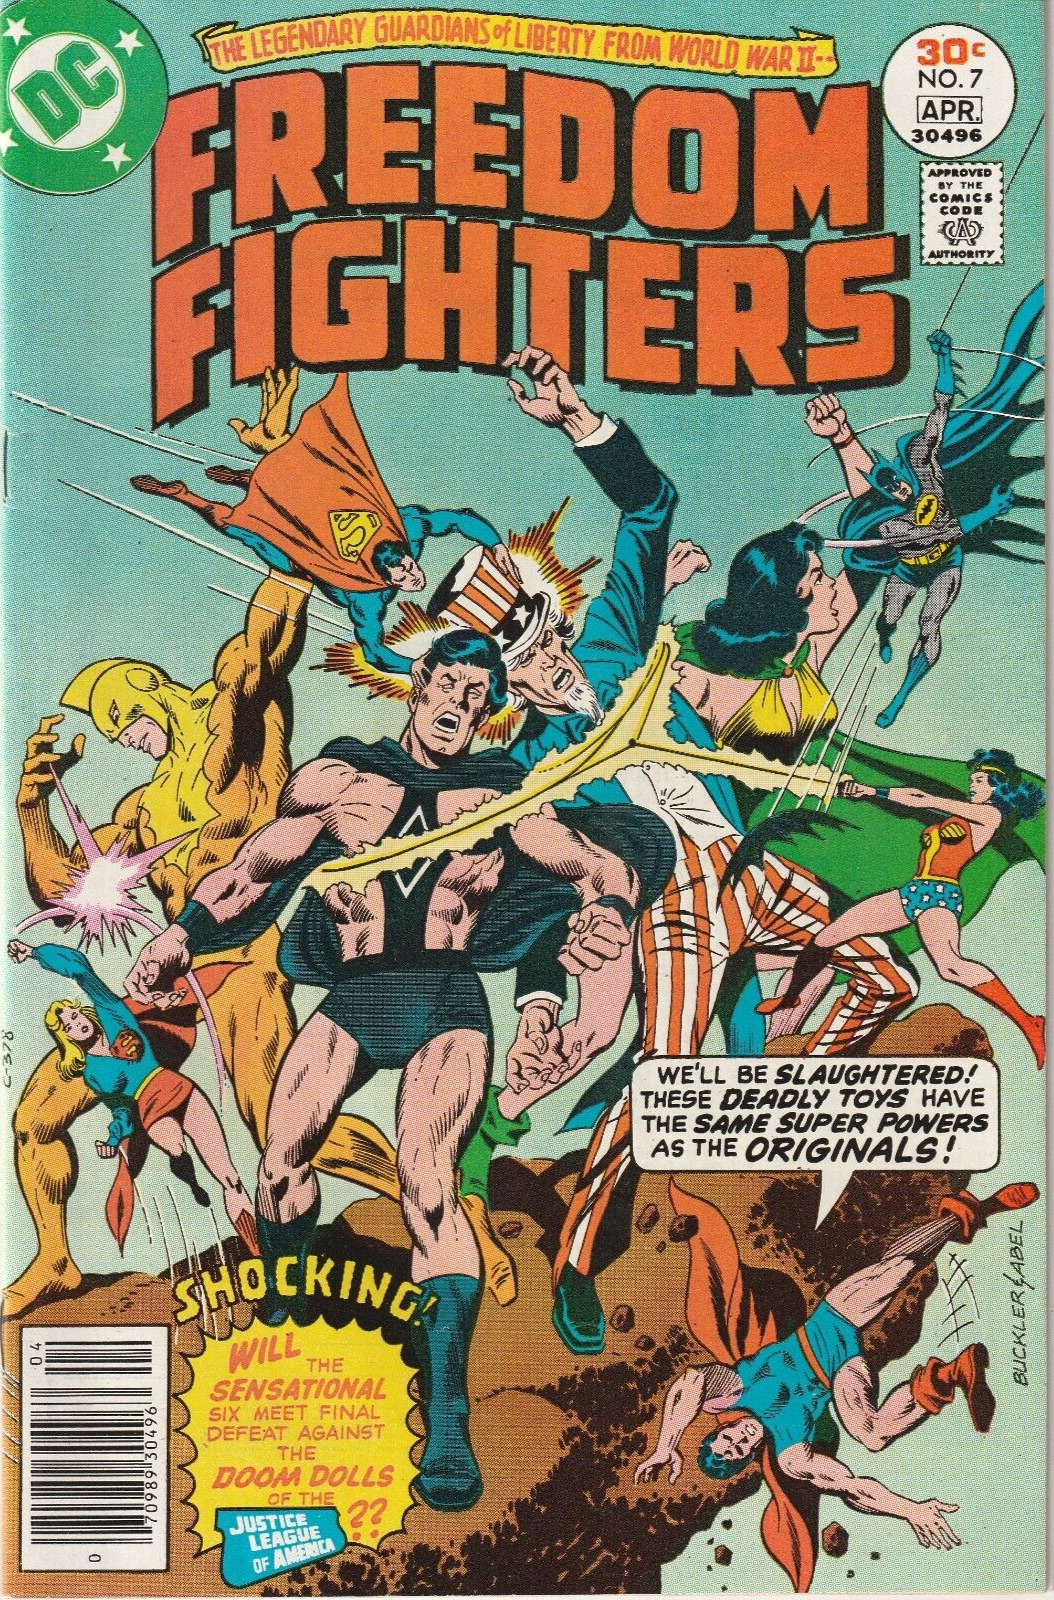 FREEDOM FIGHTERS #7   THE CRUSADERS * THE ELF  DC  1977  NICE!!!